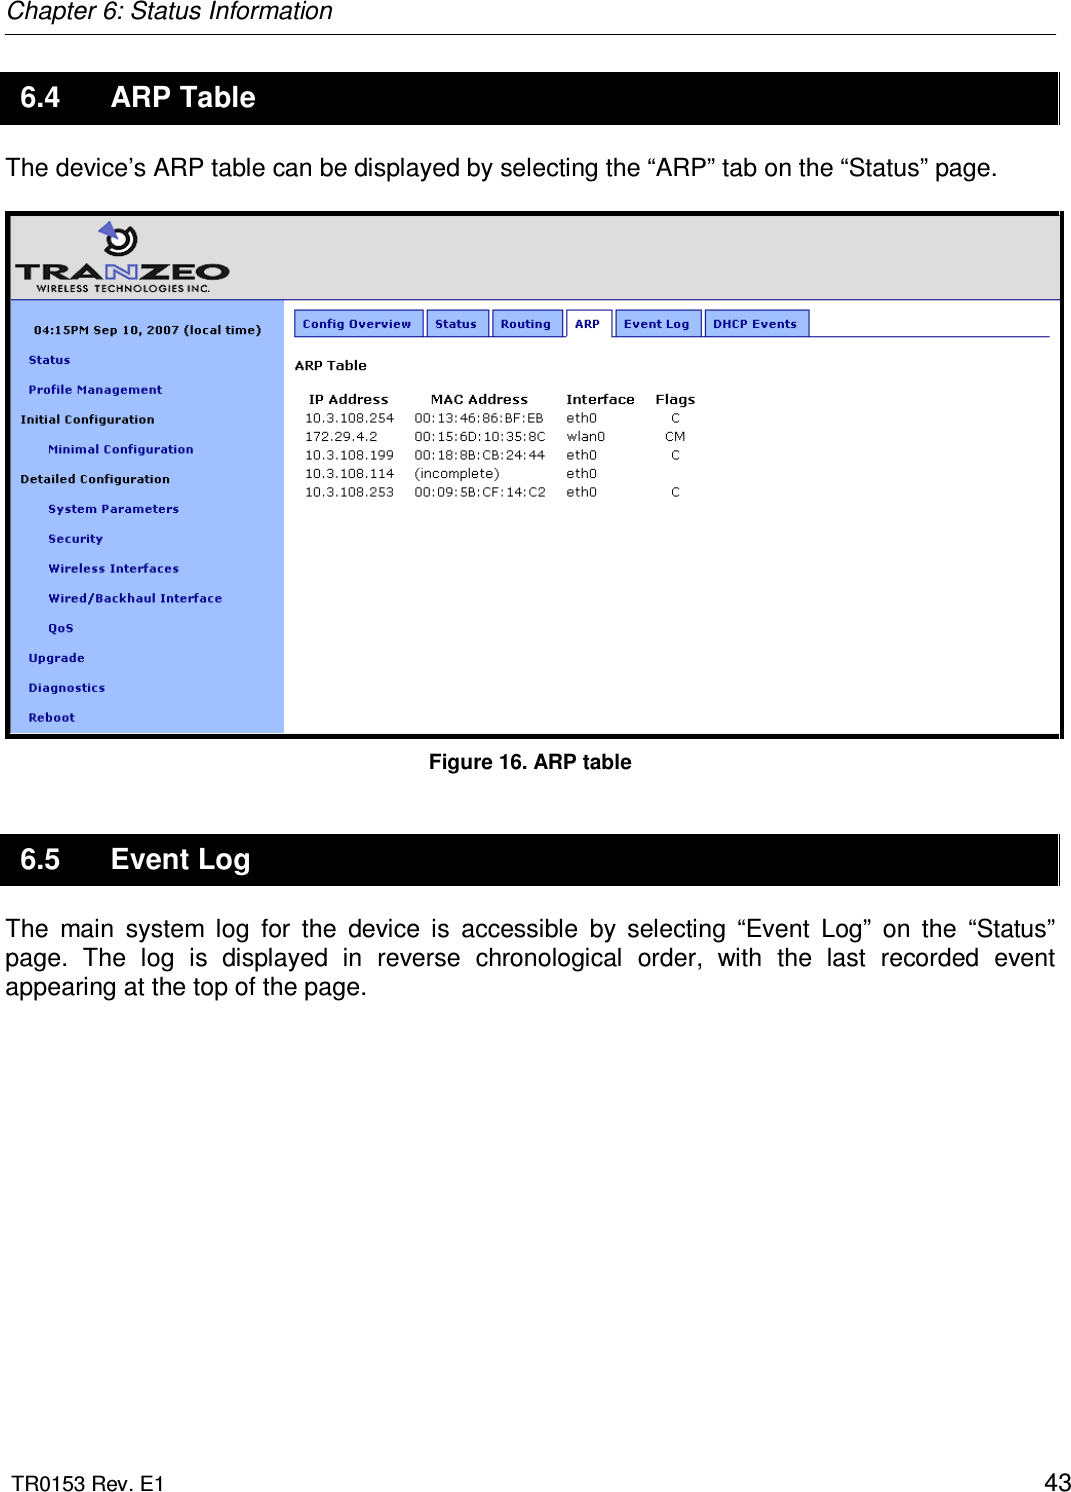 Chapter 6: Status Information  TR0153 Rev. E1    43 6.4  ARP Table The device’s ARP table can be displayed by selecting the “ARP” tab on the “Status” page.   Figure 16. ARP table 6.5  Event Log The  main  system  log  for  the  device  is  accessible  by  selecting  “Event  Log”  on  the  “Status” page.  The  log  is  displayed  in  reverse  chronological  order,  with  the  last  recorded  event appearing at the top of the page.  